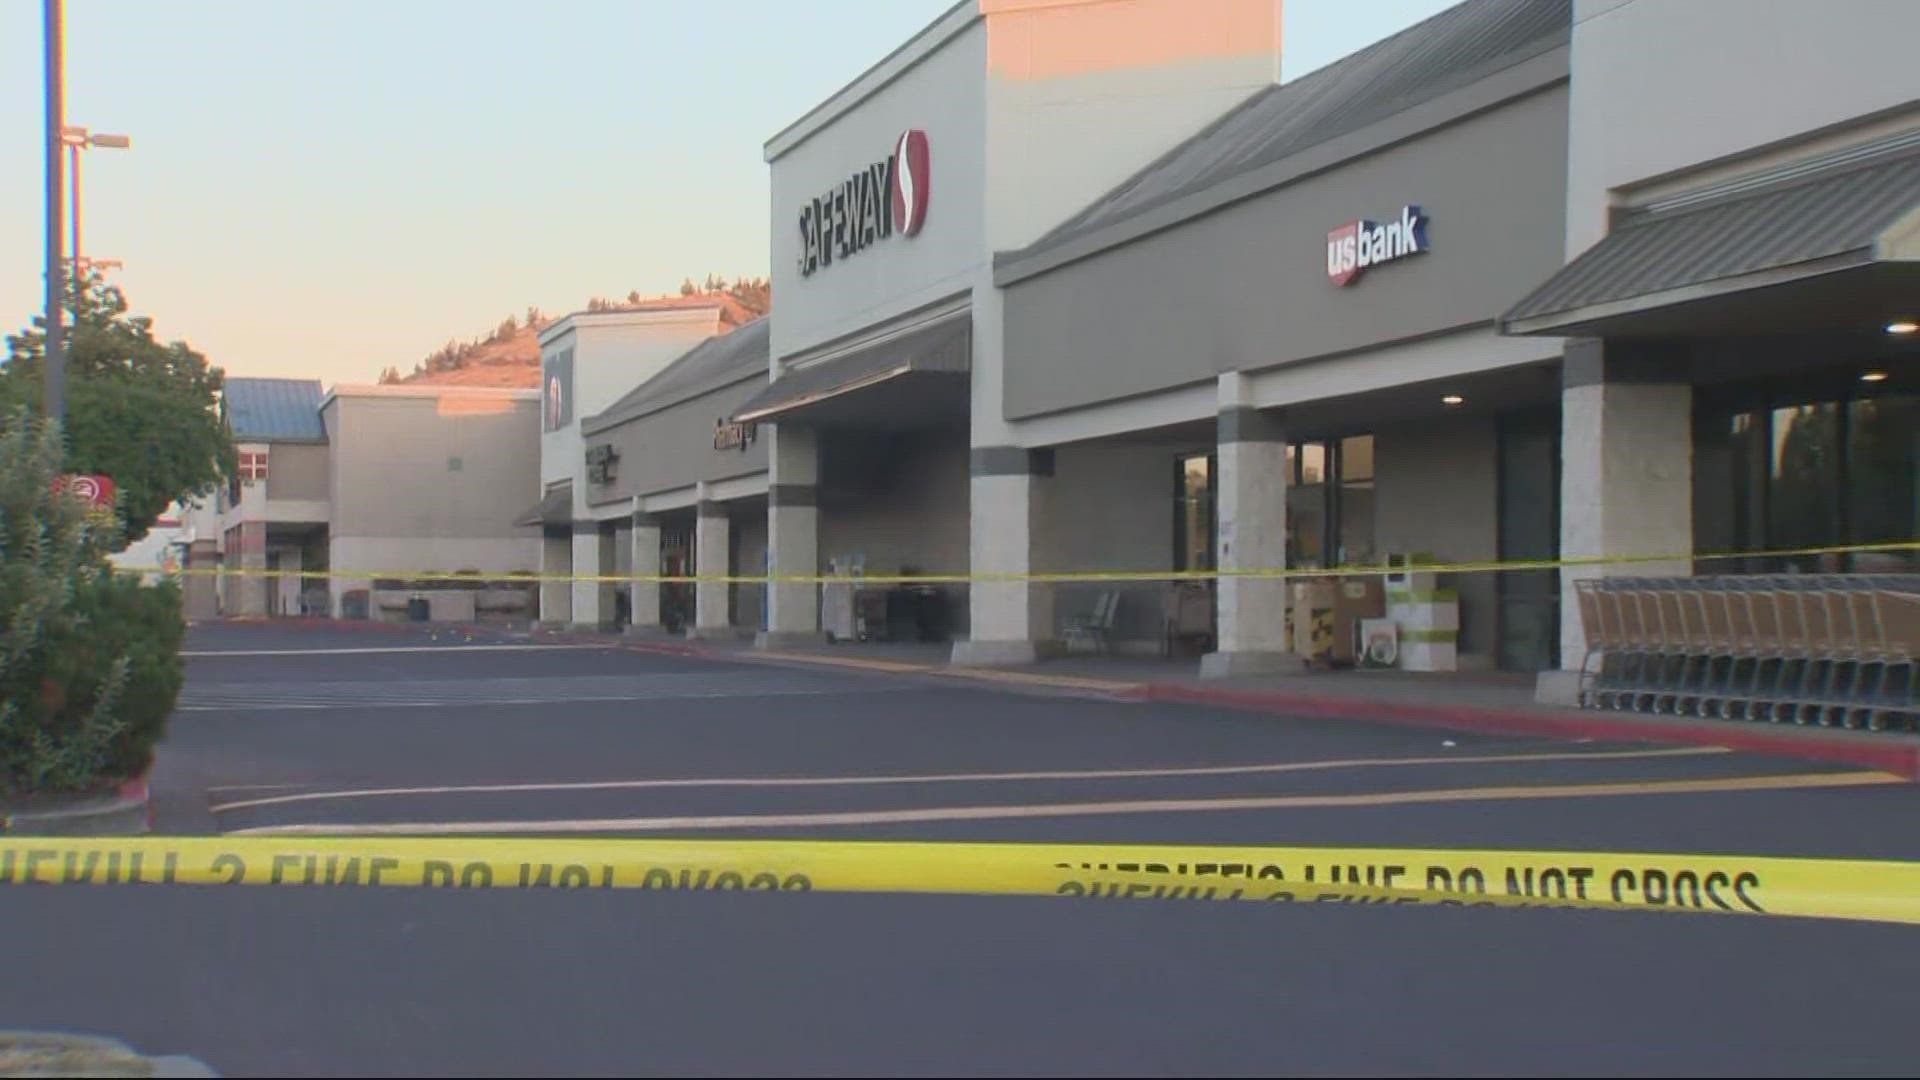 Bend police say two people were killed and the suspected shooter is also dead after a shooting at a Safeway store in Bend, Oregon on Sunday, Aug. 28, 2022.